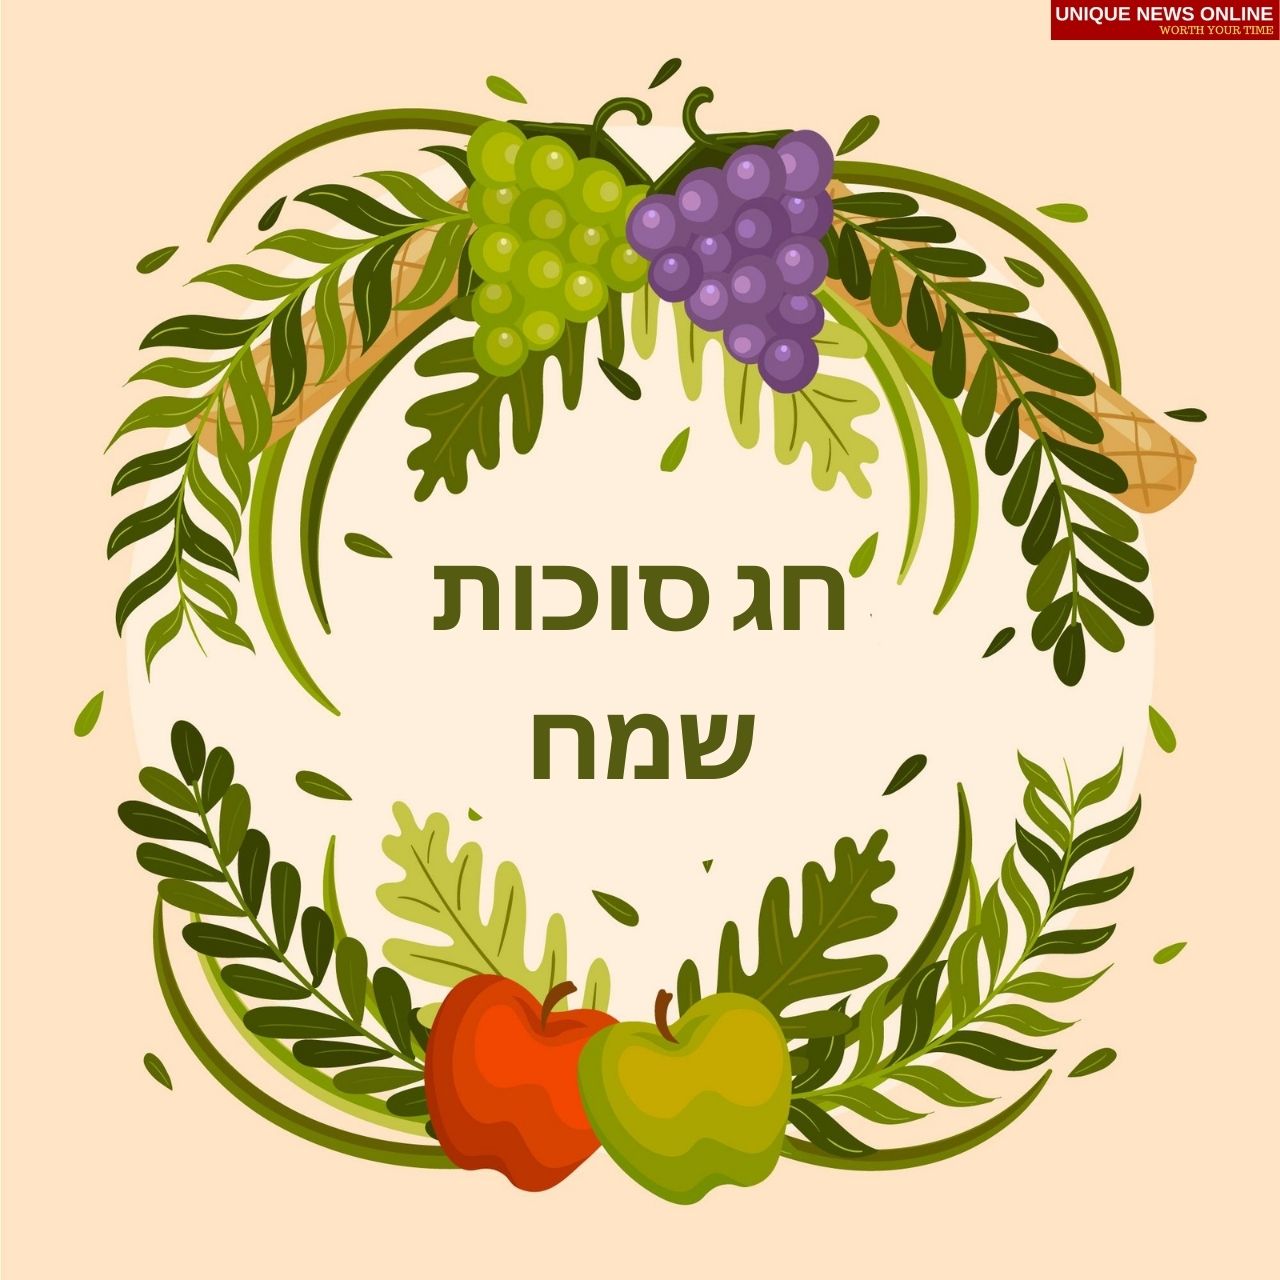 Happy Sukkot 2021 Hebrew Wishes, Greetings, Quotes, Images, Poster and Stickers to share